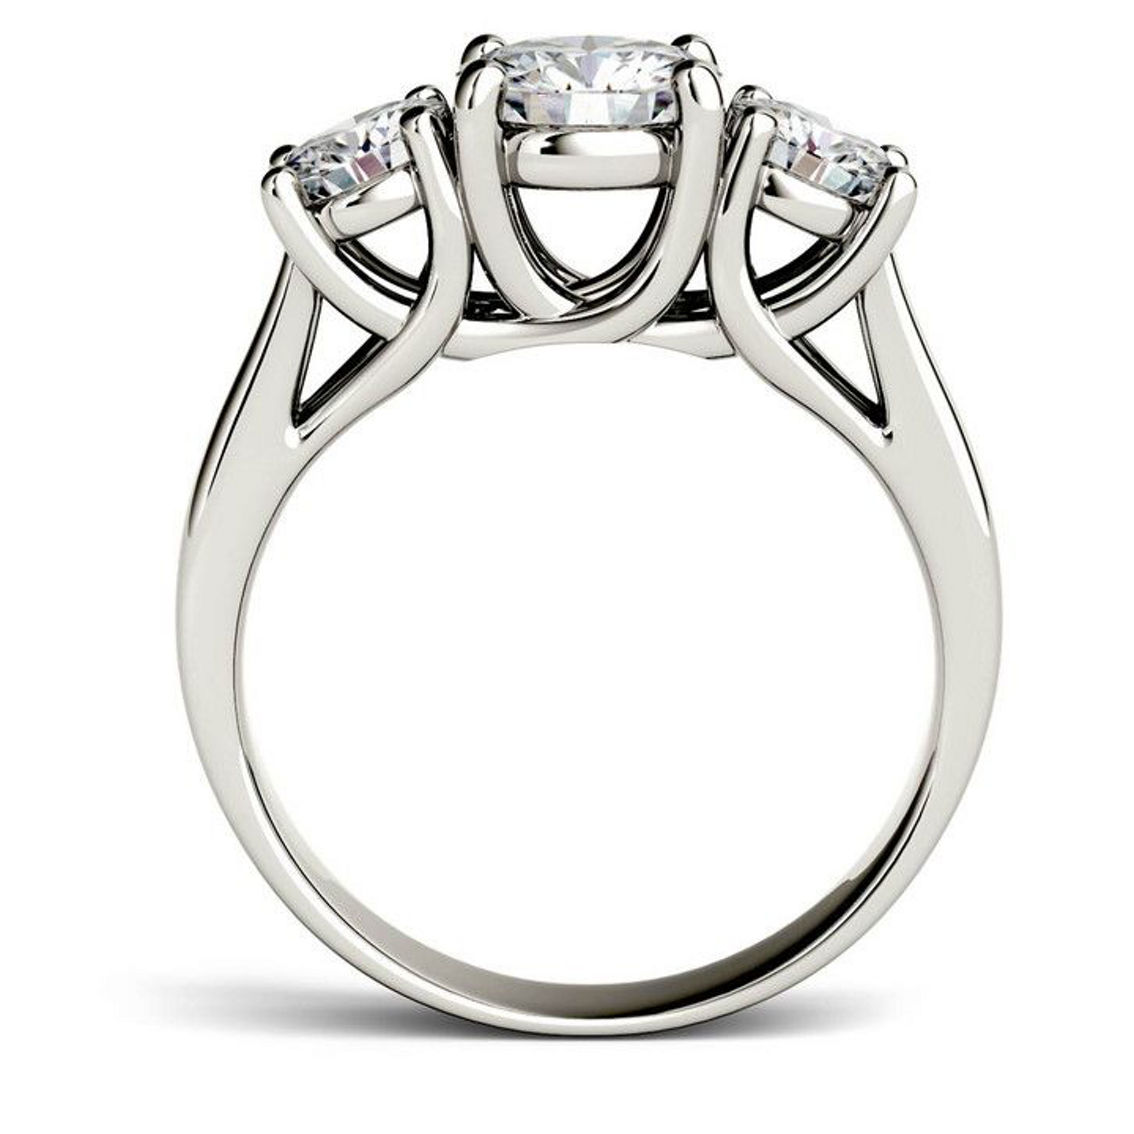 Charles & Colvard 2.00cttw Moissanite Three Stone Ring in 14K Gold - Image 2 of 5